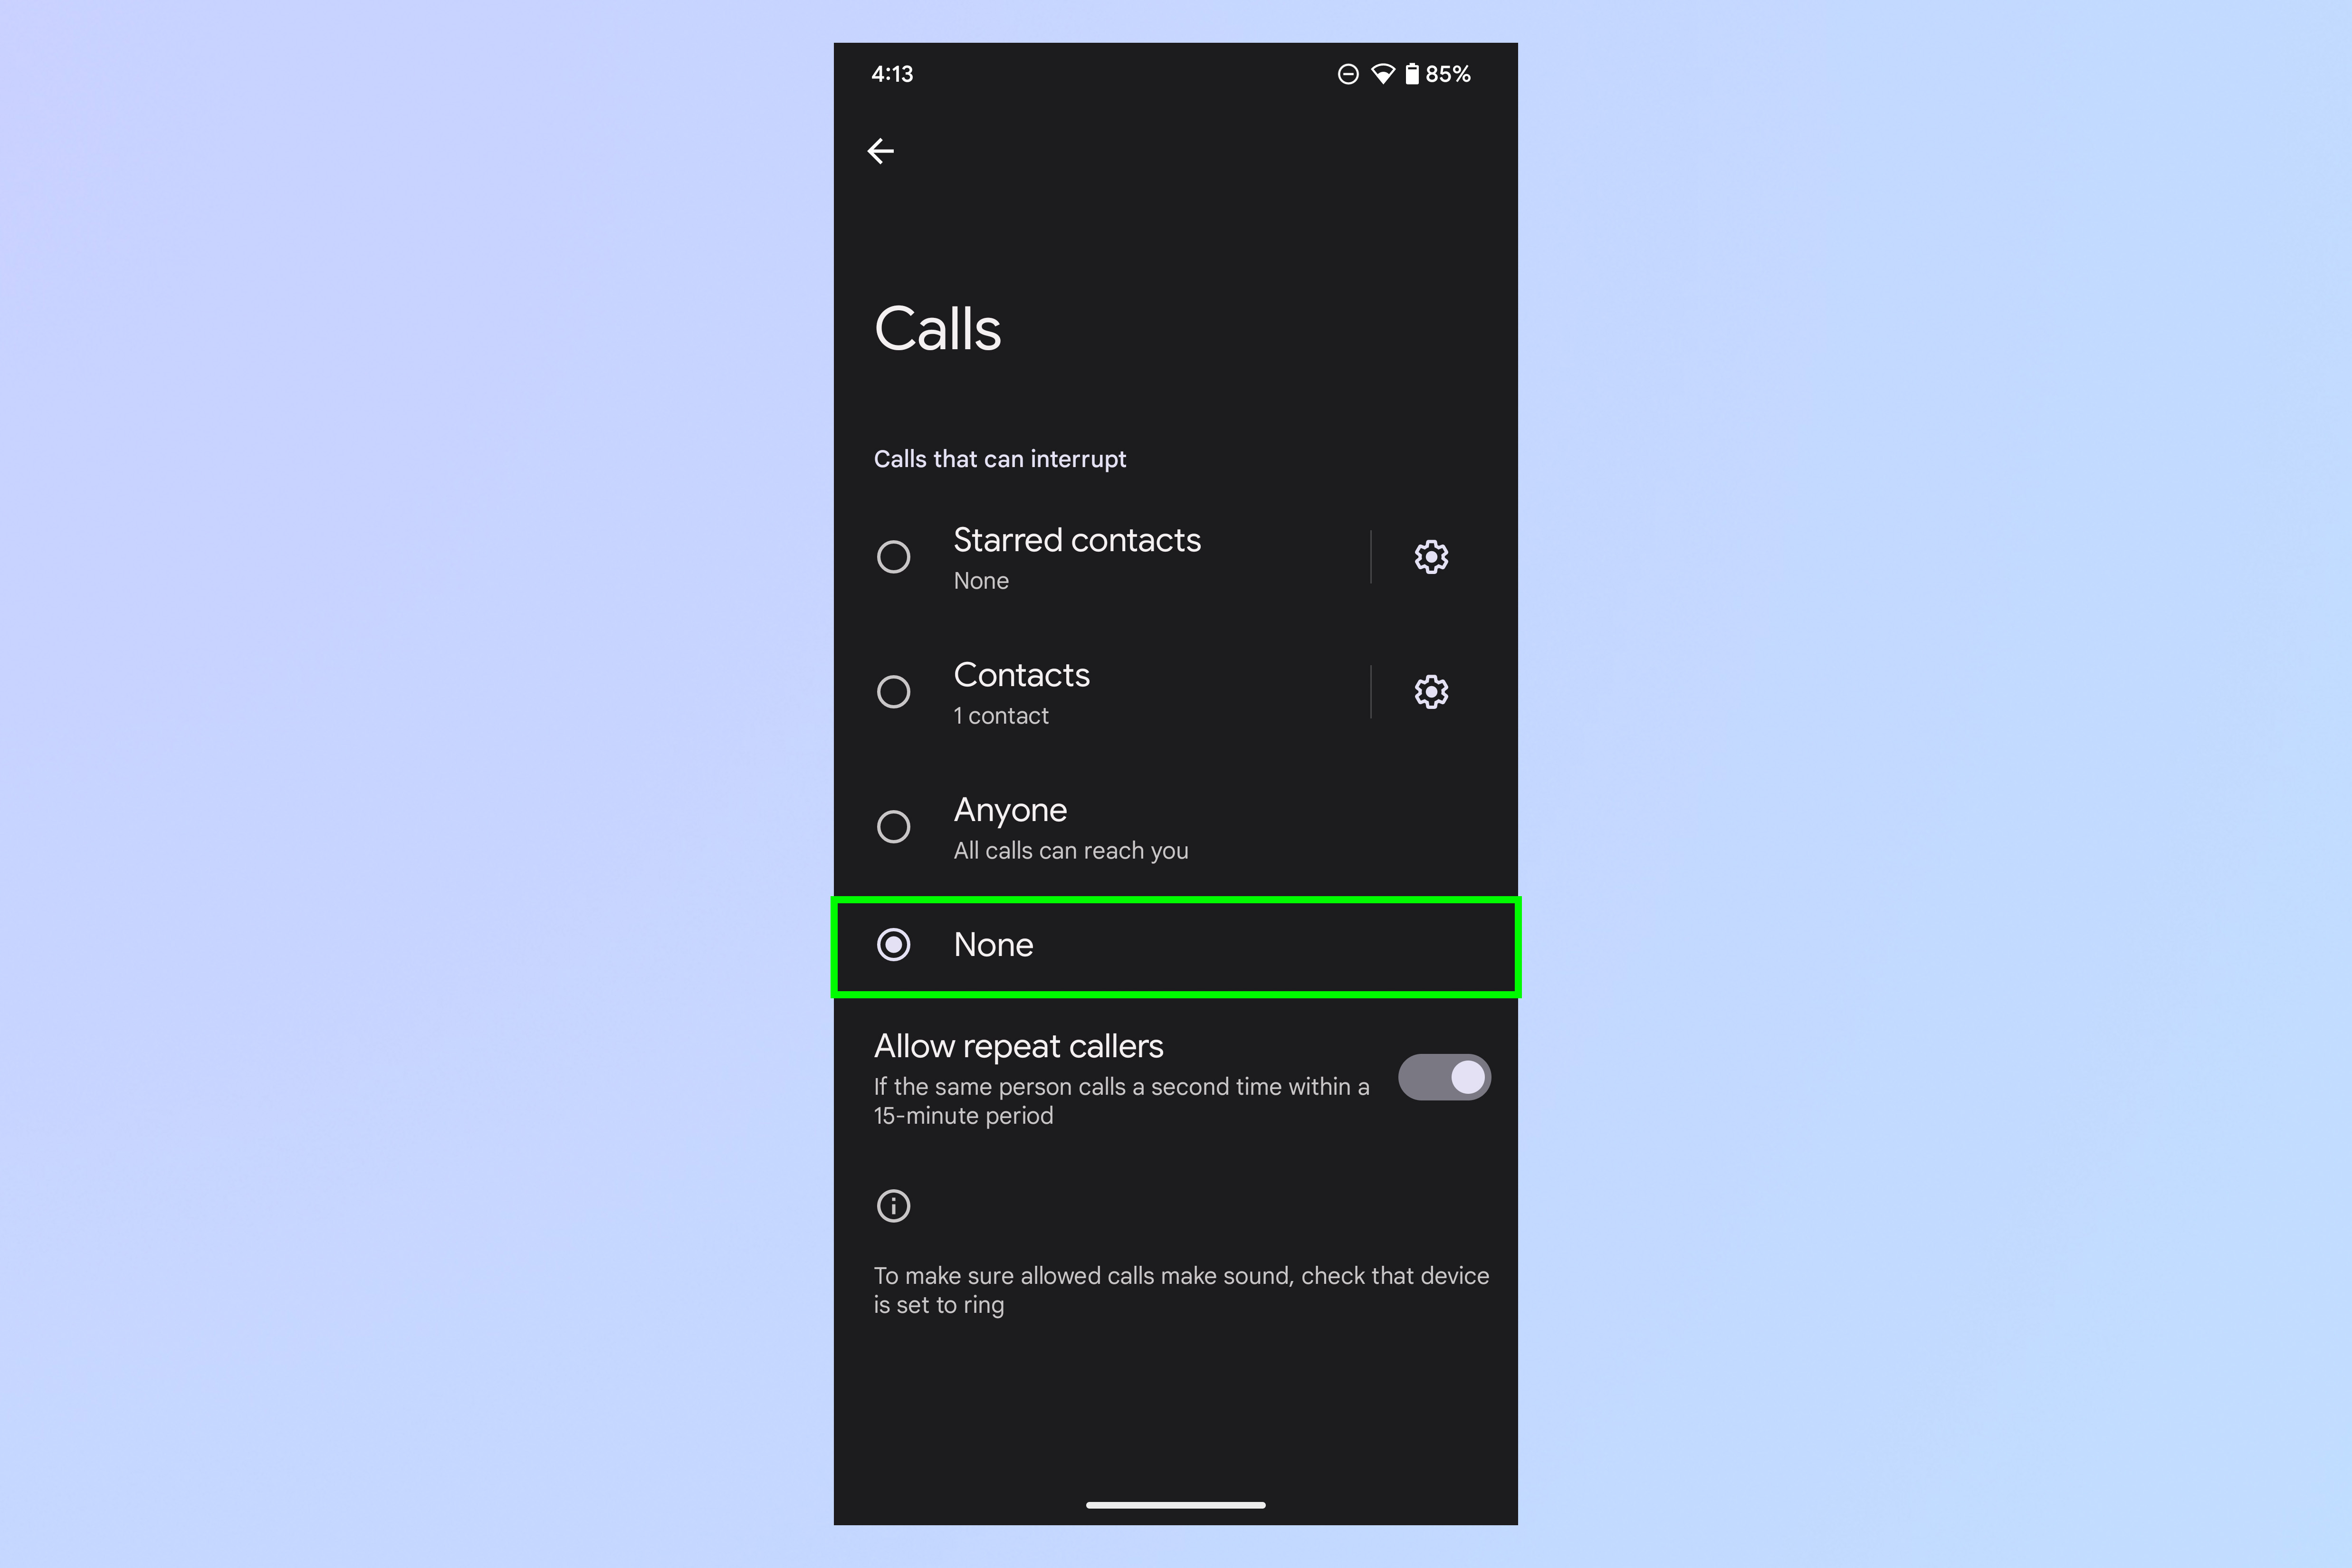 A screenshot showing the steps required to block all calls on Android.